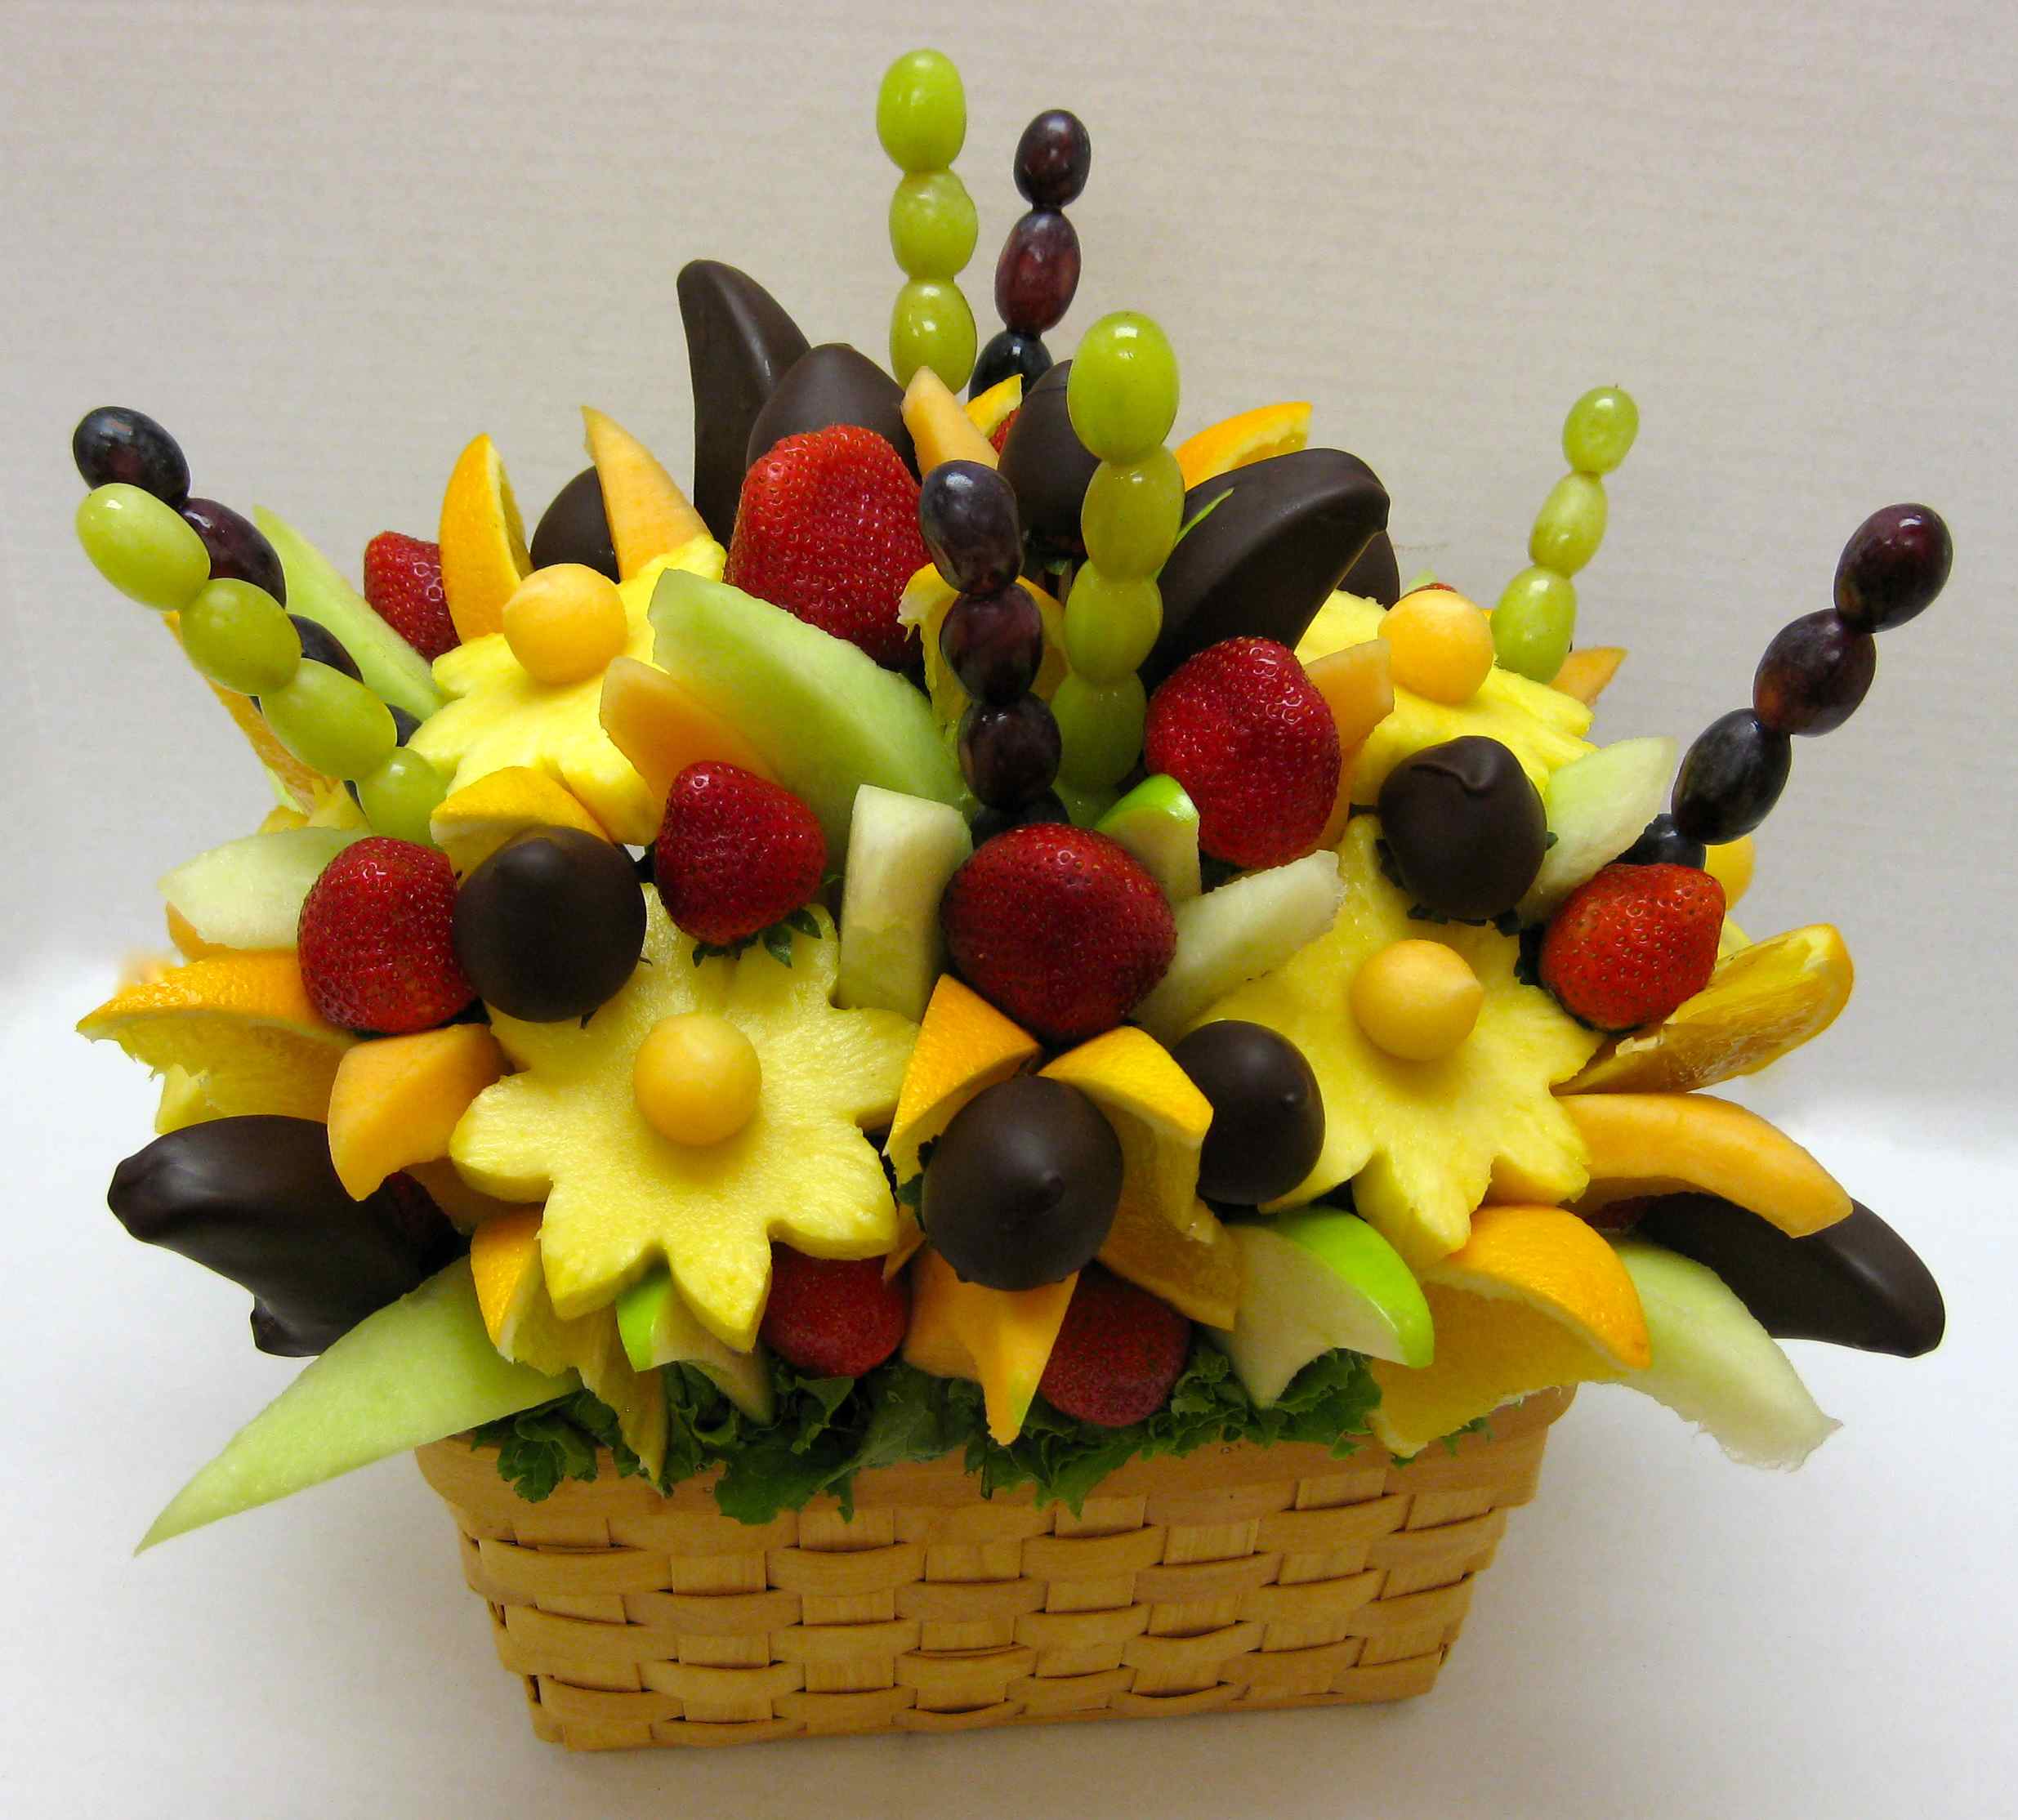 How To Make Edible Arrangements Fruit Baskets At Home